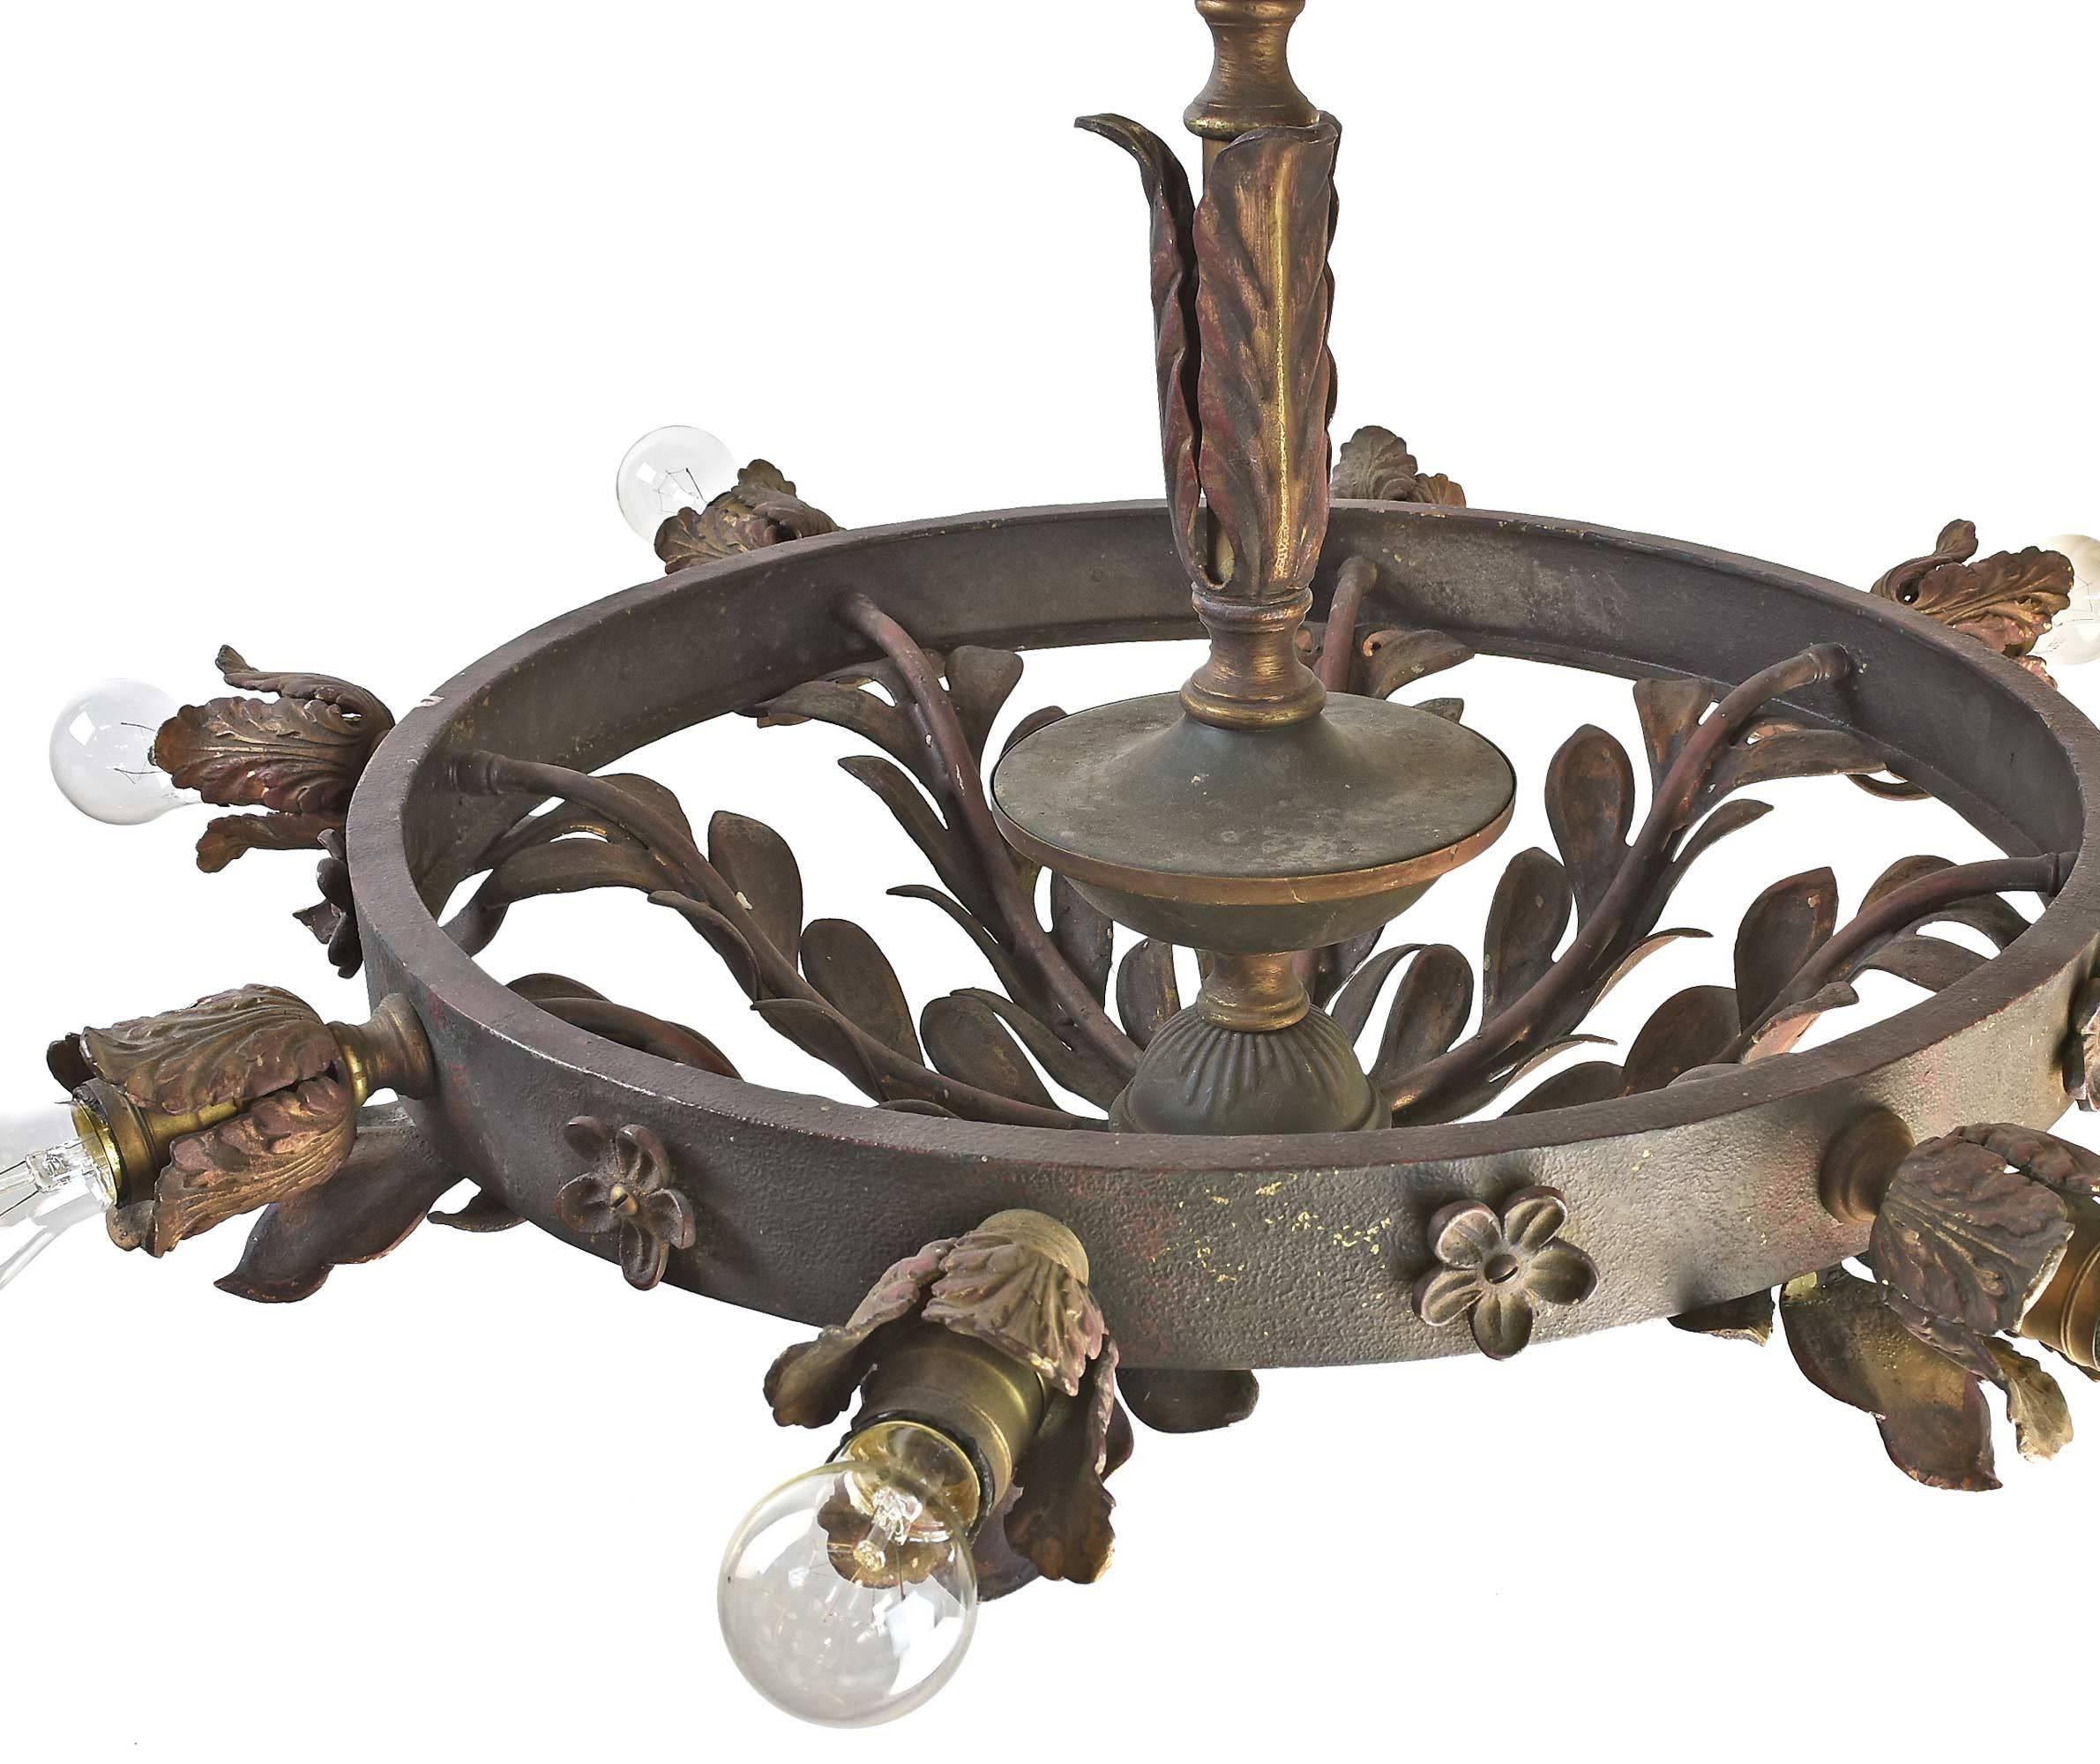 Spanish Colonial Early American Iron and Brass Theatre Fixture